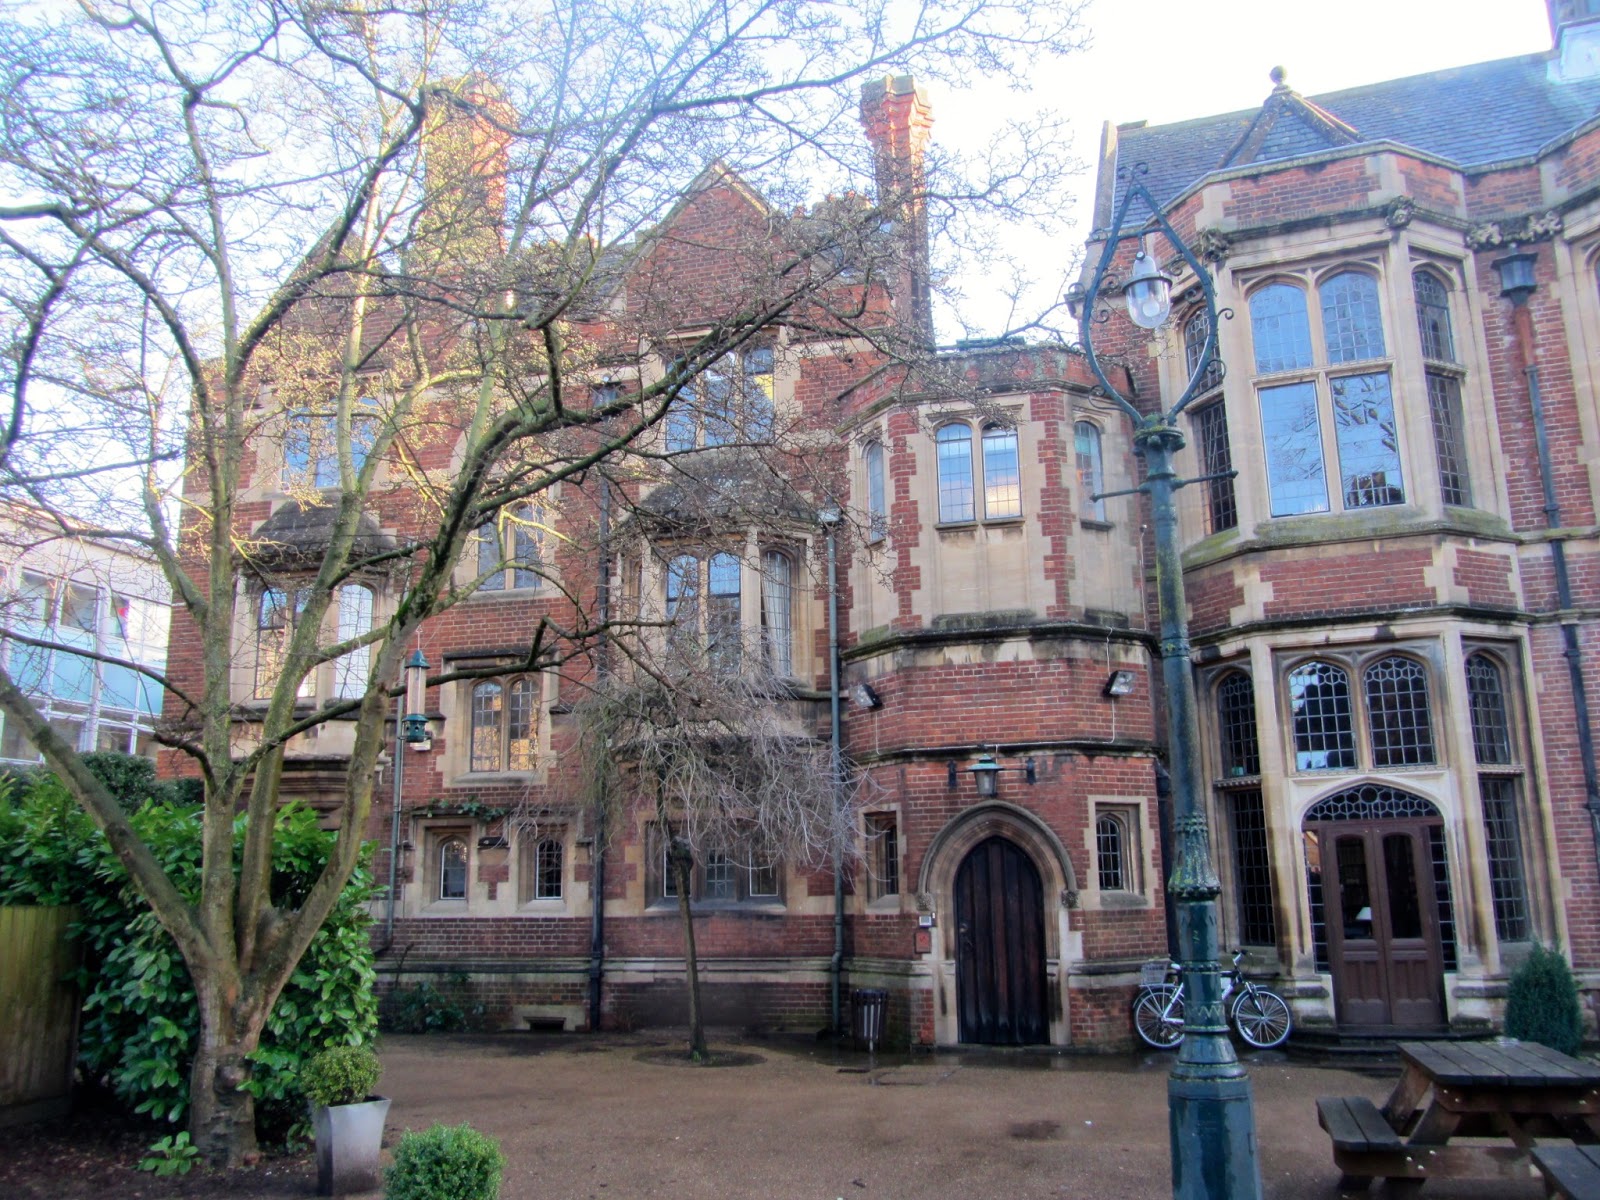 Curiouser and Curiouser: The Oxford Union